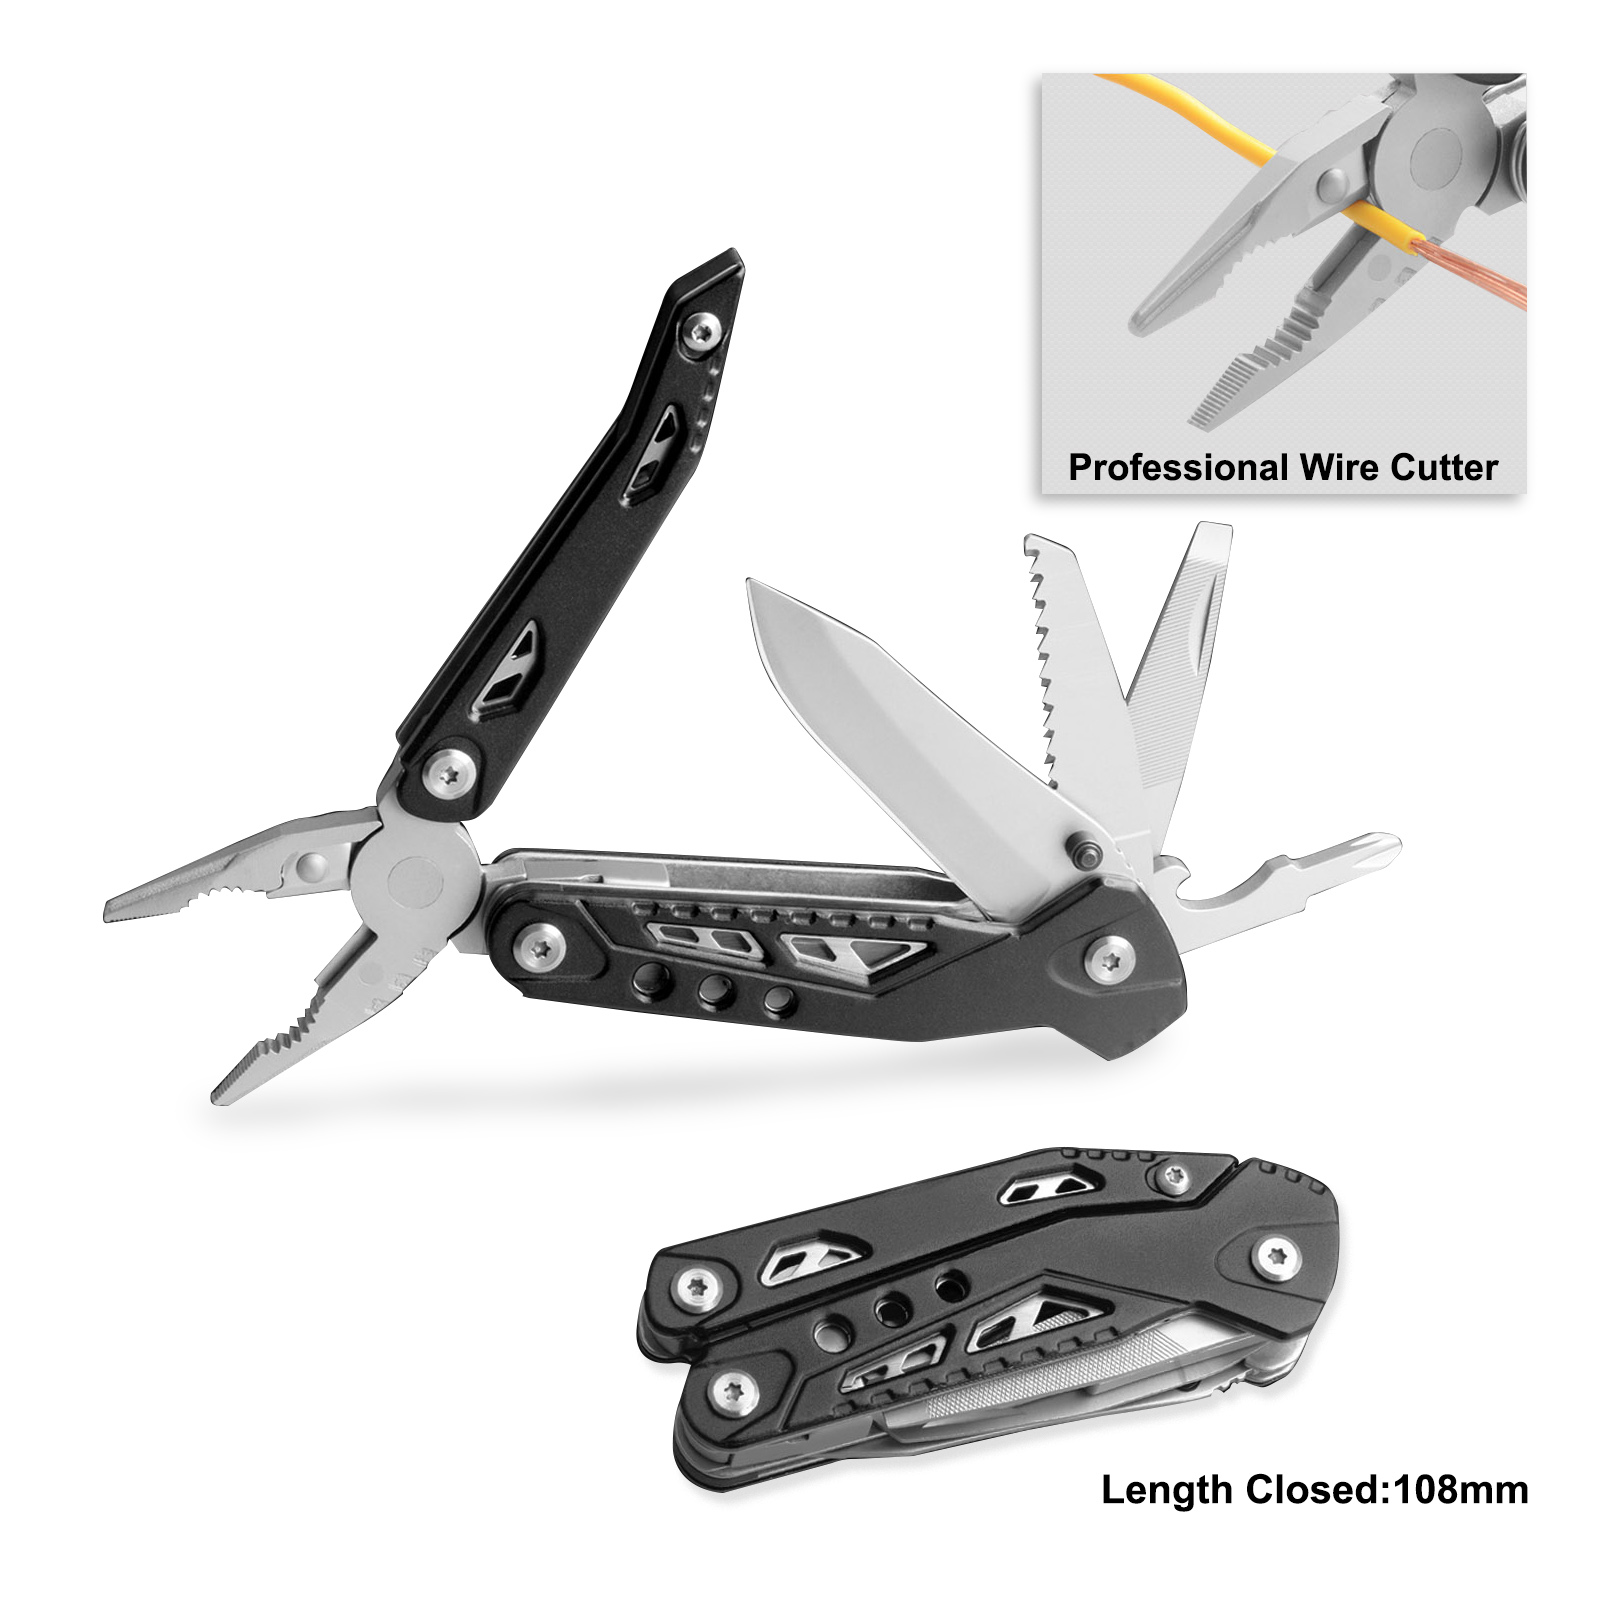 #8459B Top Quality Multitool with Professional Wire Cutter